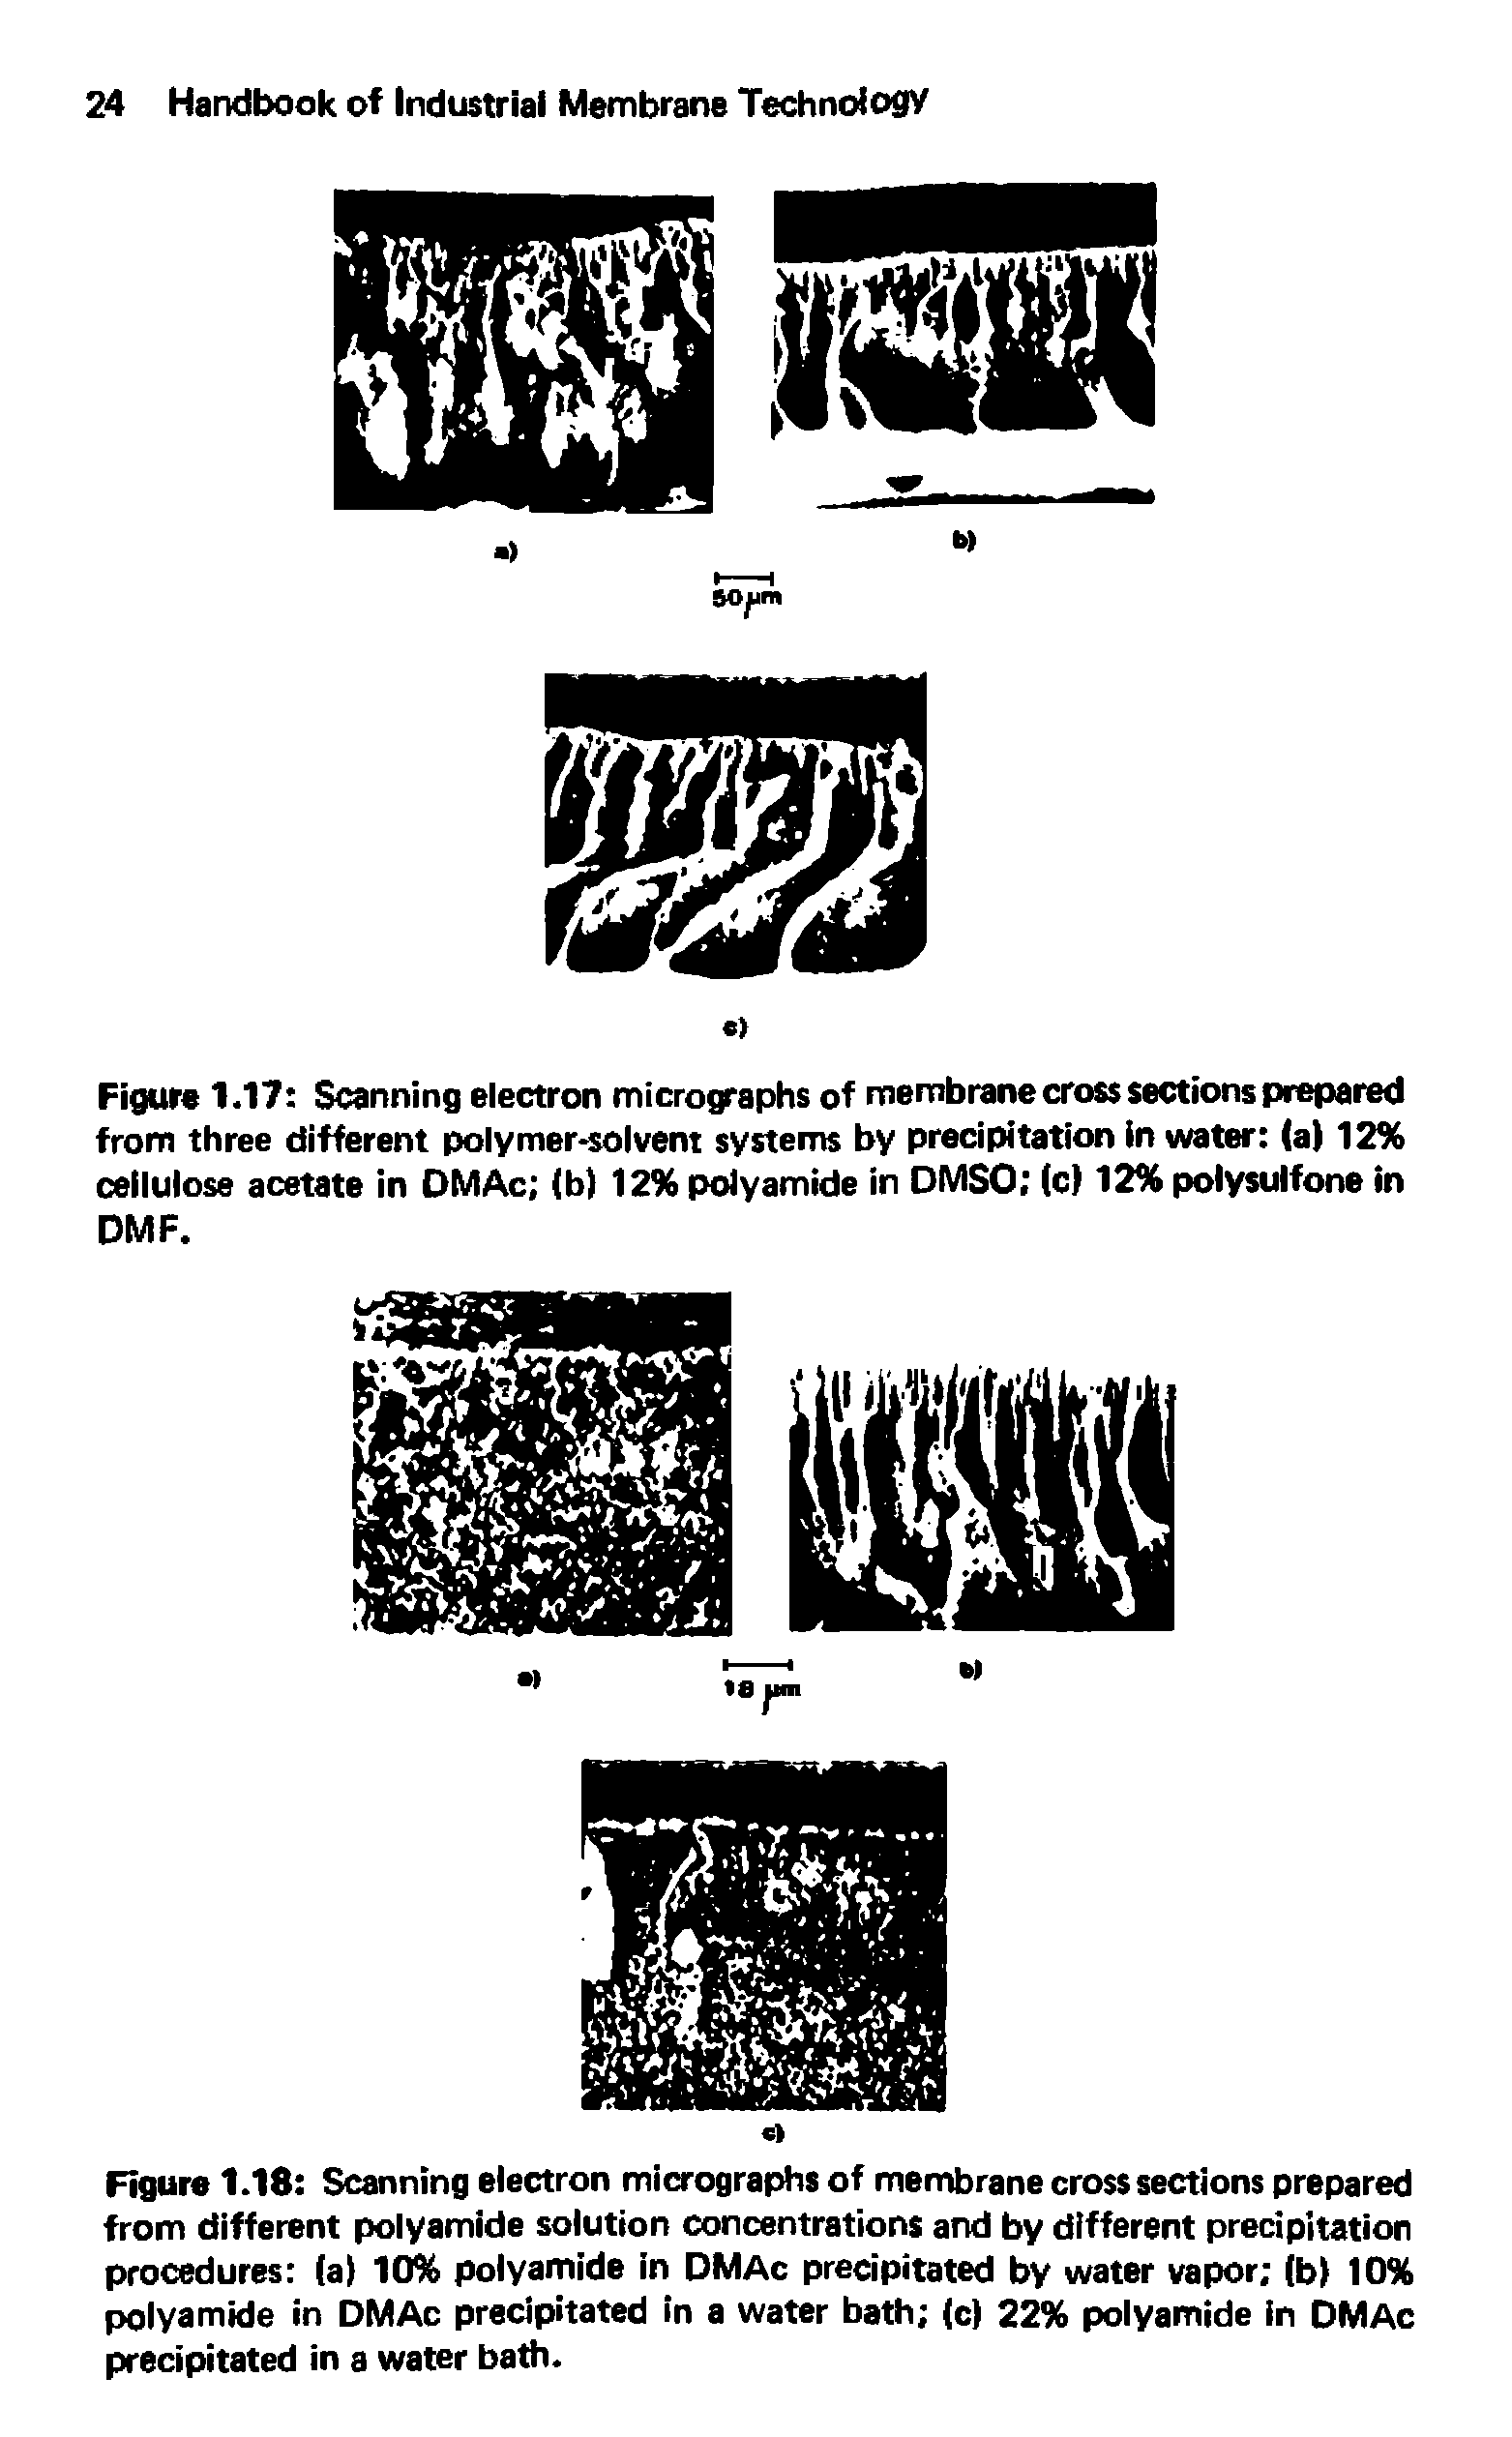 Figure 1.17 Scanning electron micrographs of membrane cross sections prepared from three different polymer-solvent systems by precipitation in water (a) 12% cellulose acetate in DMAc (b) 12% polyamide in DMSO (c) 12% polysulfone In DMF.